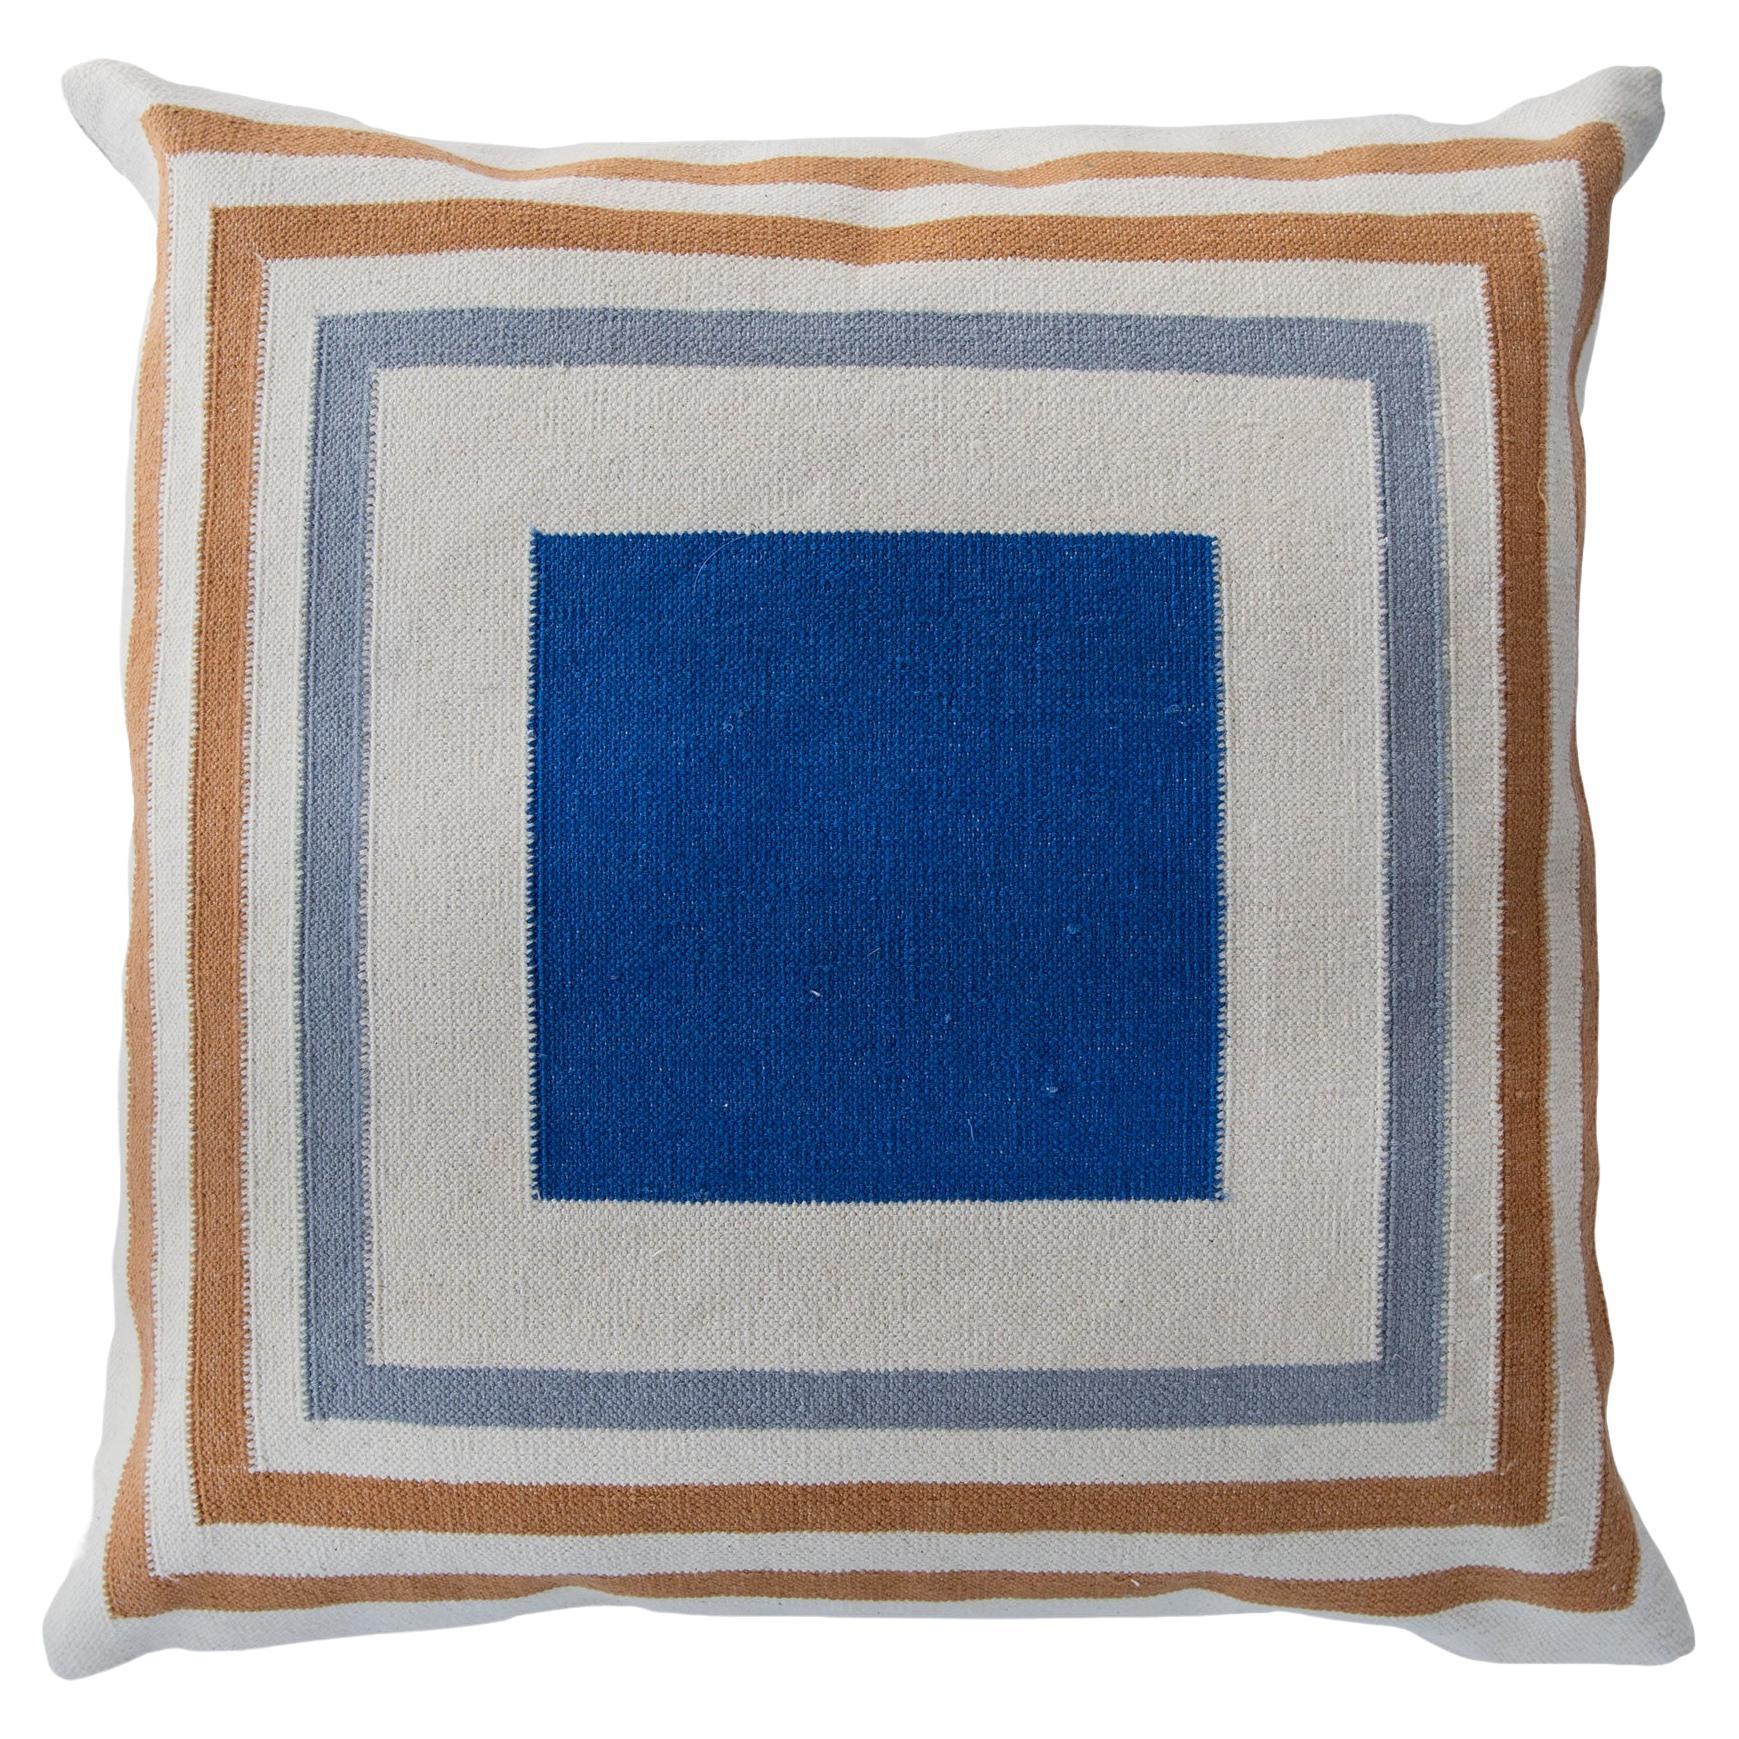 Barcelona Square Pillow For Sale